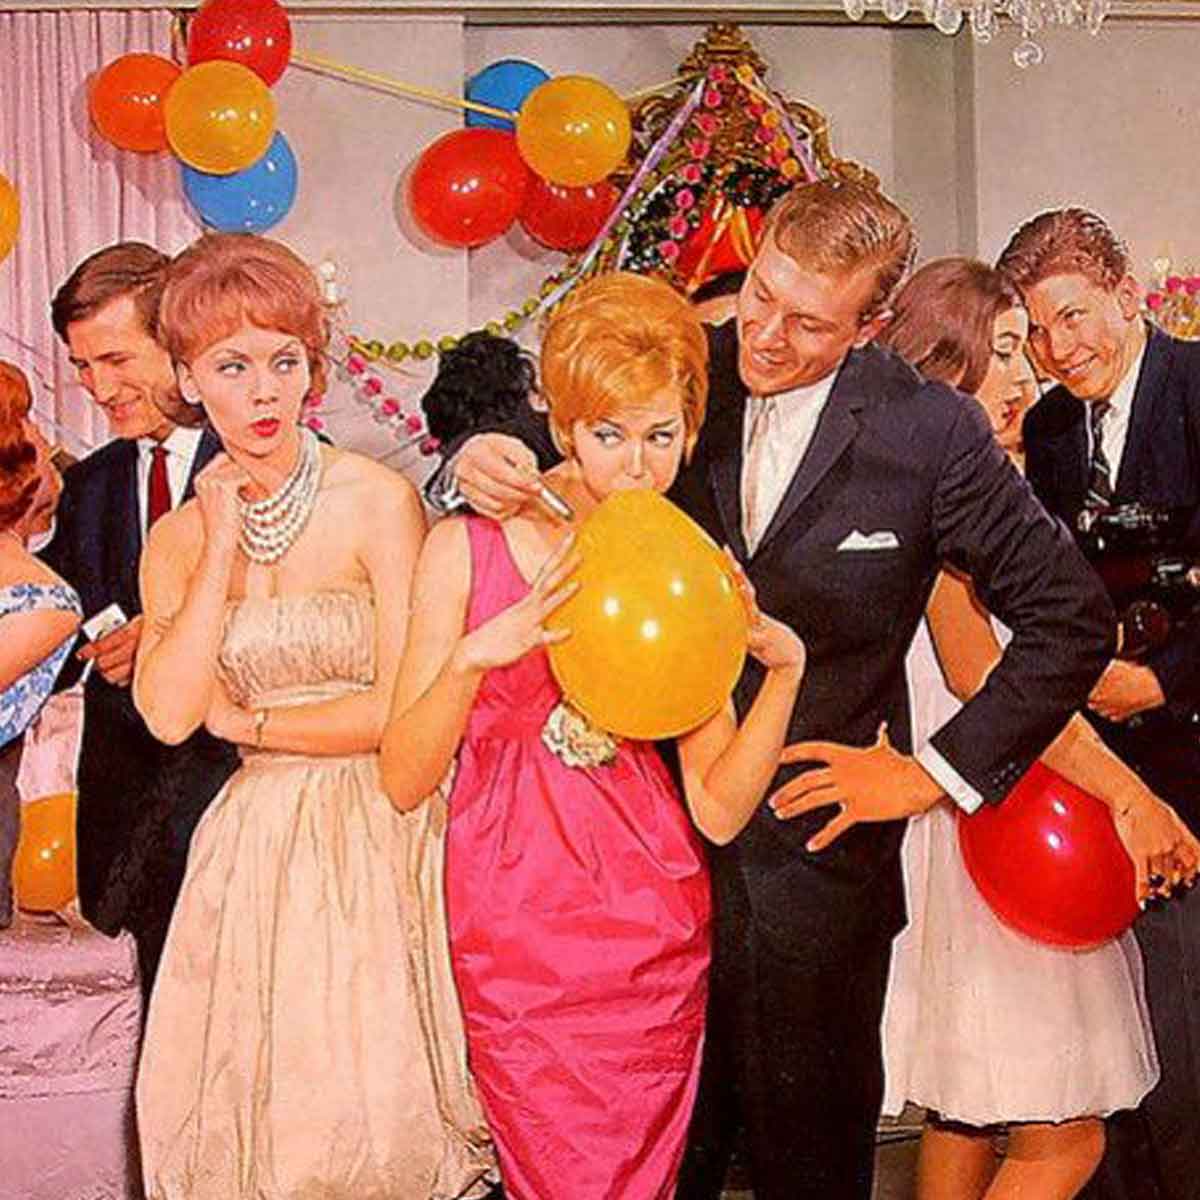 An illustration of 1950's party: a man is holding his cigarette close to a ballon while a woman watches on with scorn.